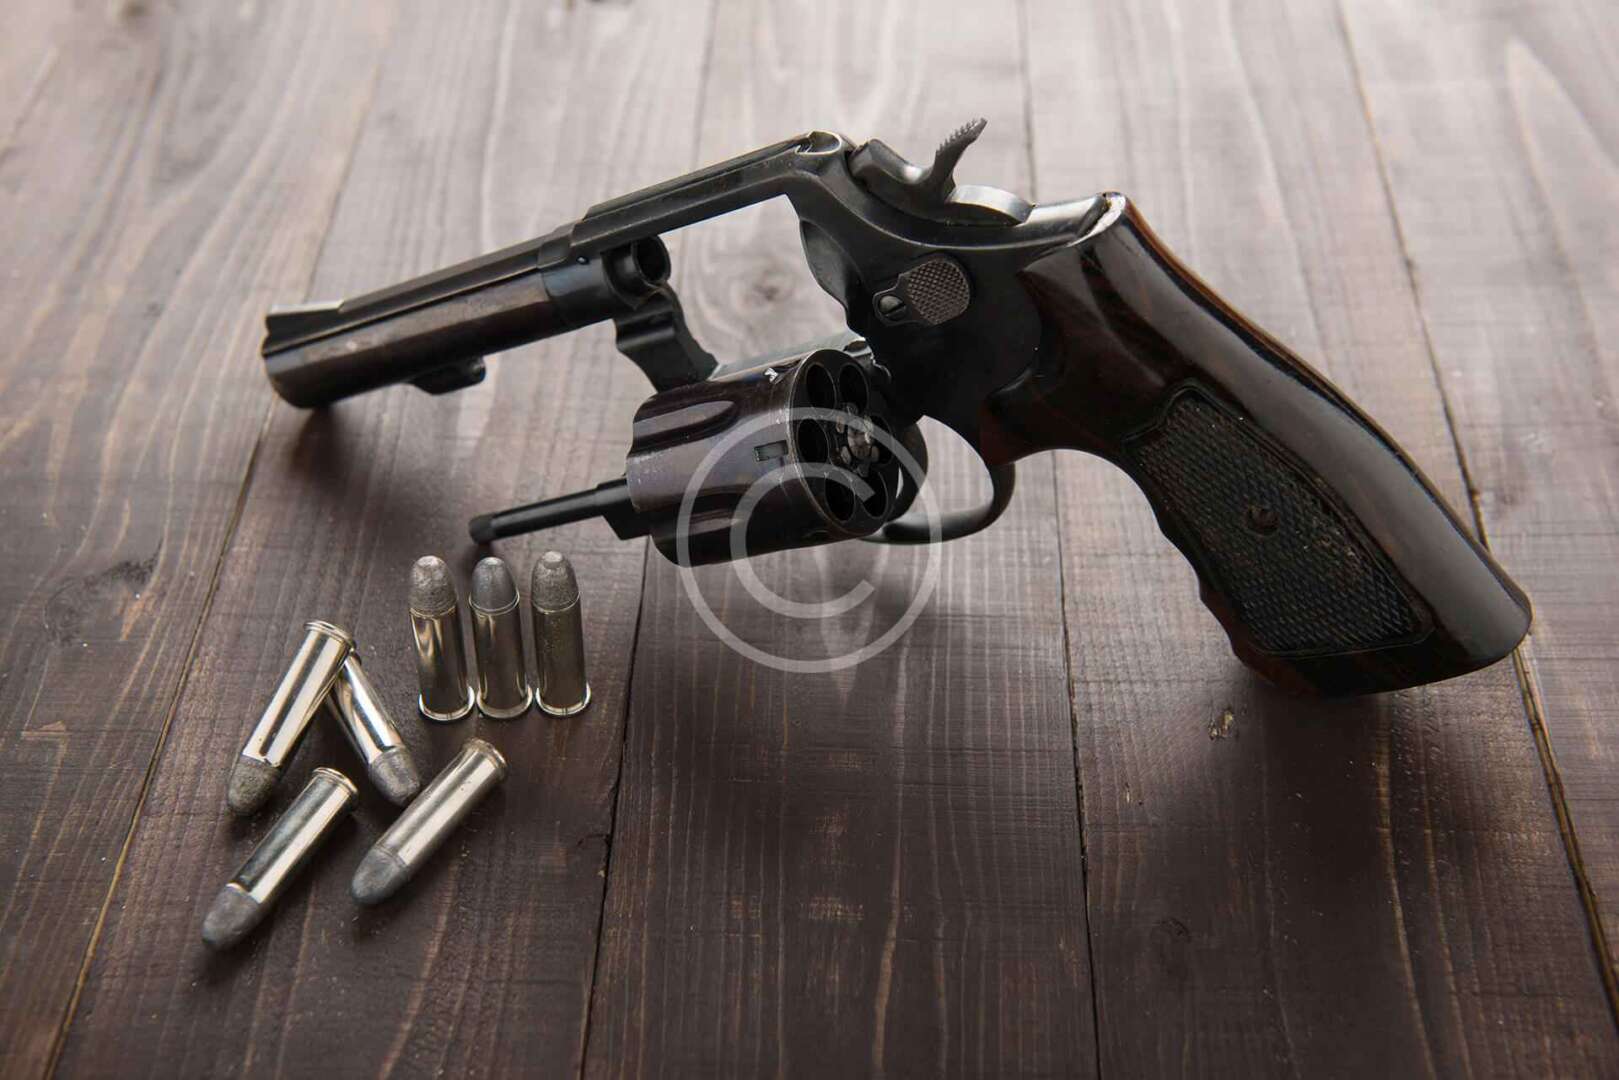 A revolver and bullets on a wooden table.